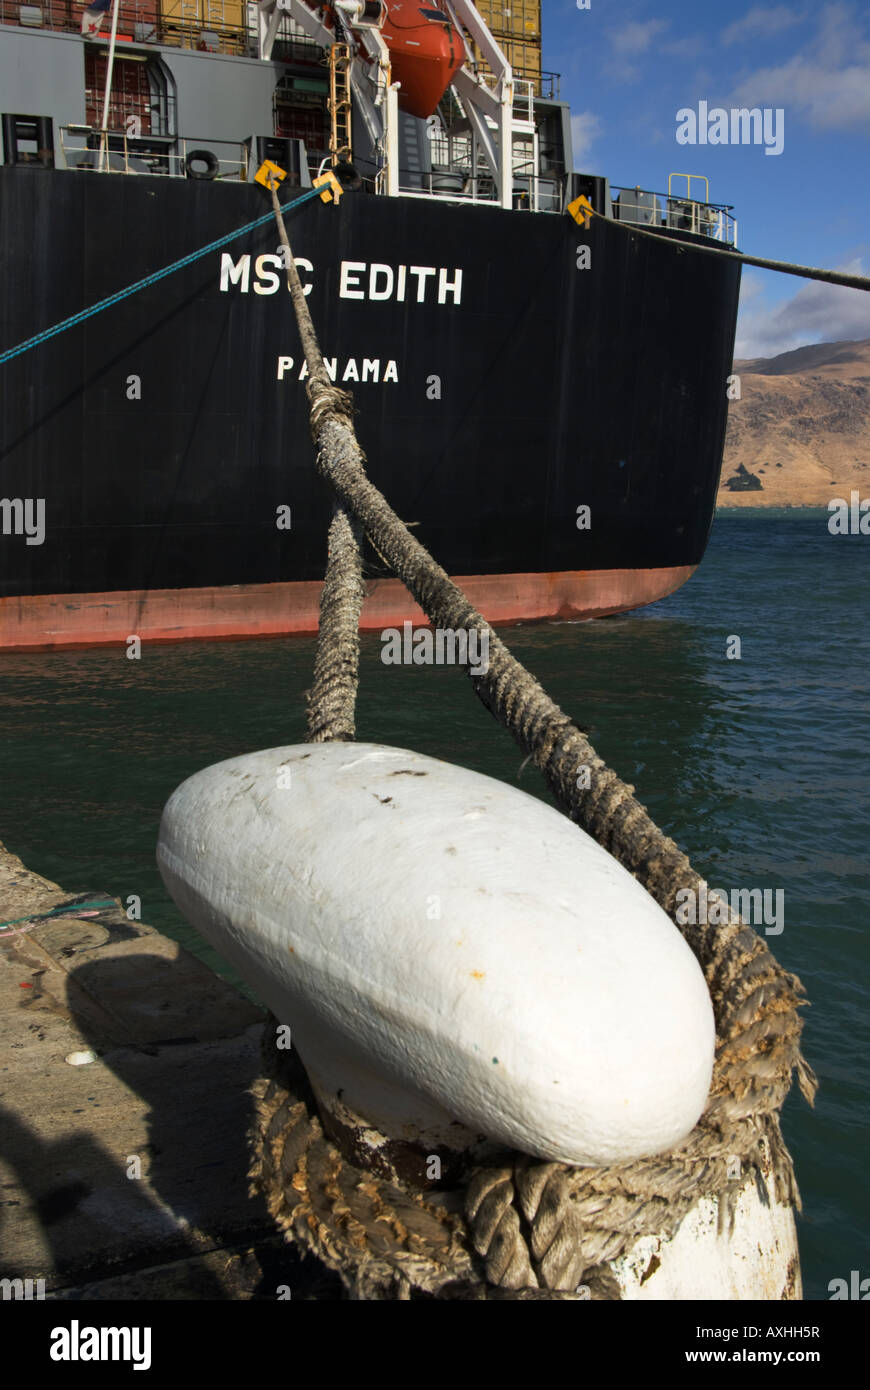 A mooring ropes securing the stern of a container ship to a shore